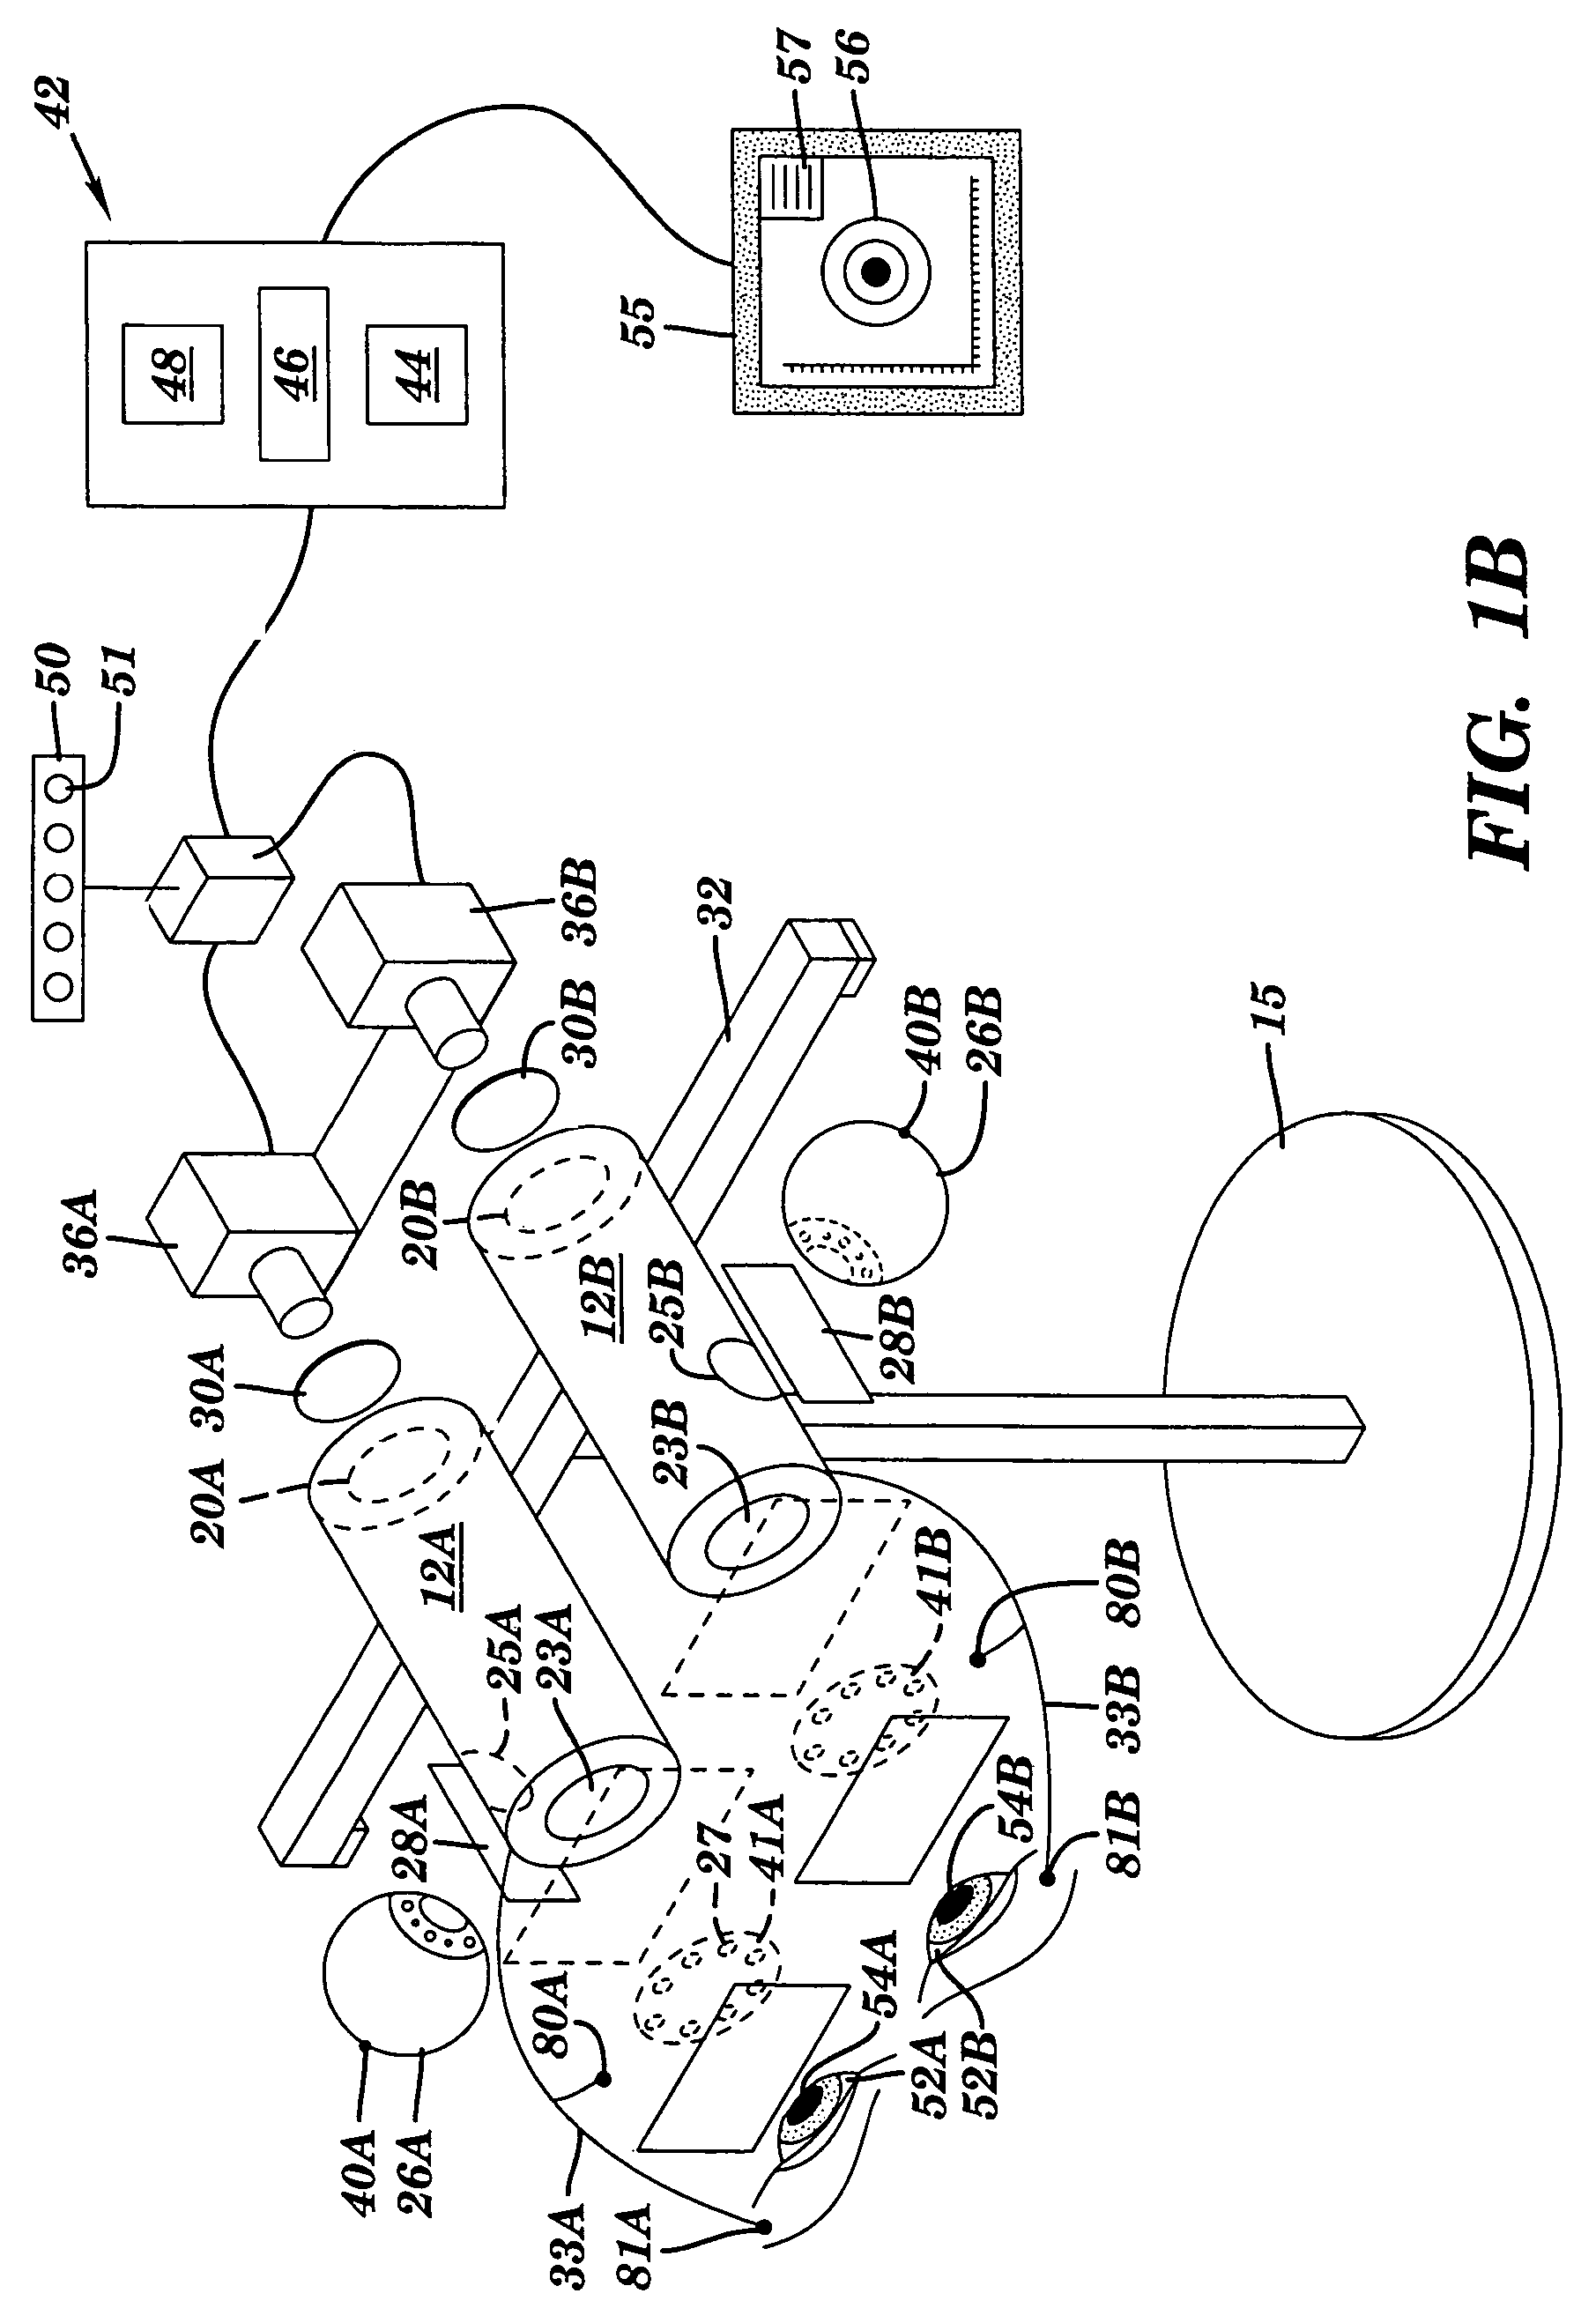 Method, system and device for detecting ocular dysfunctions